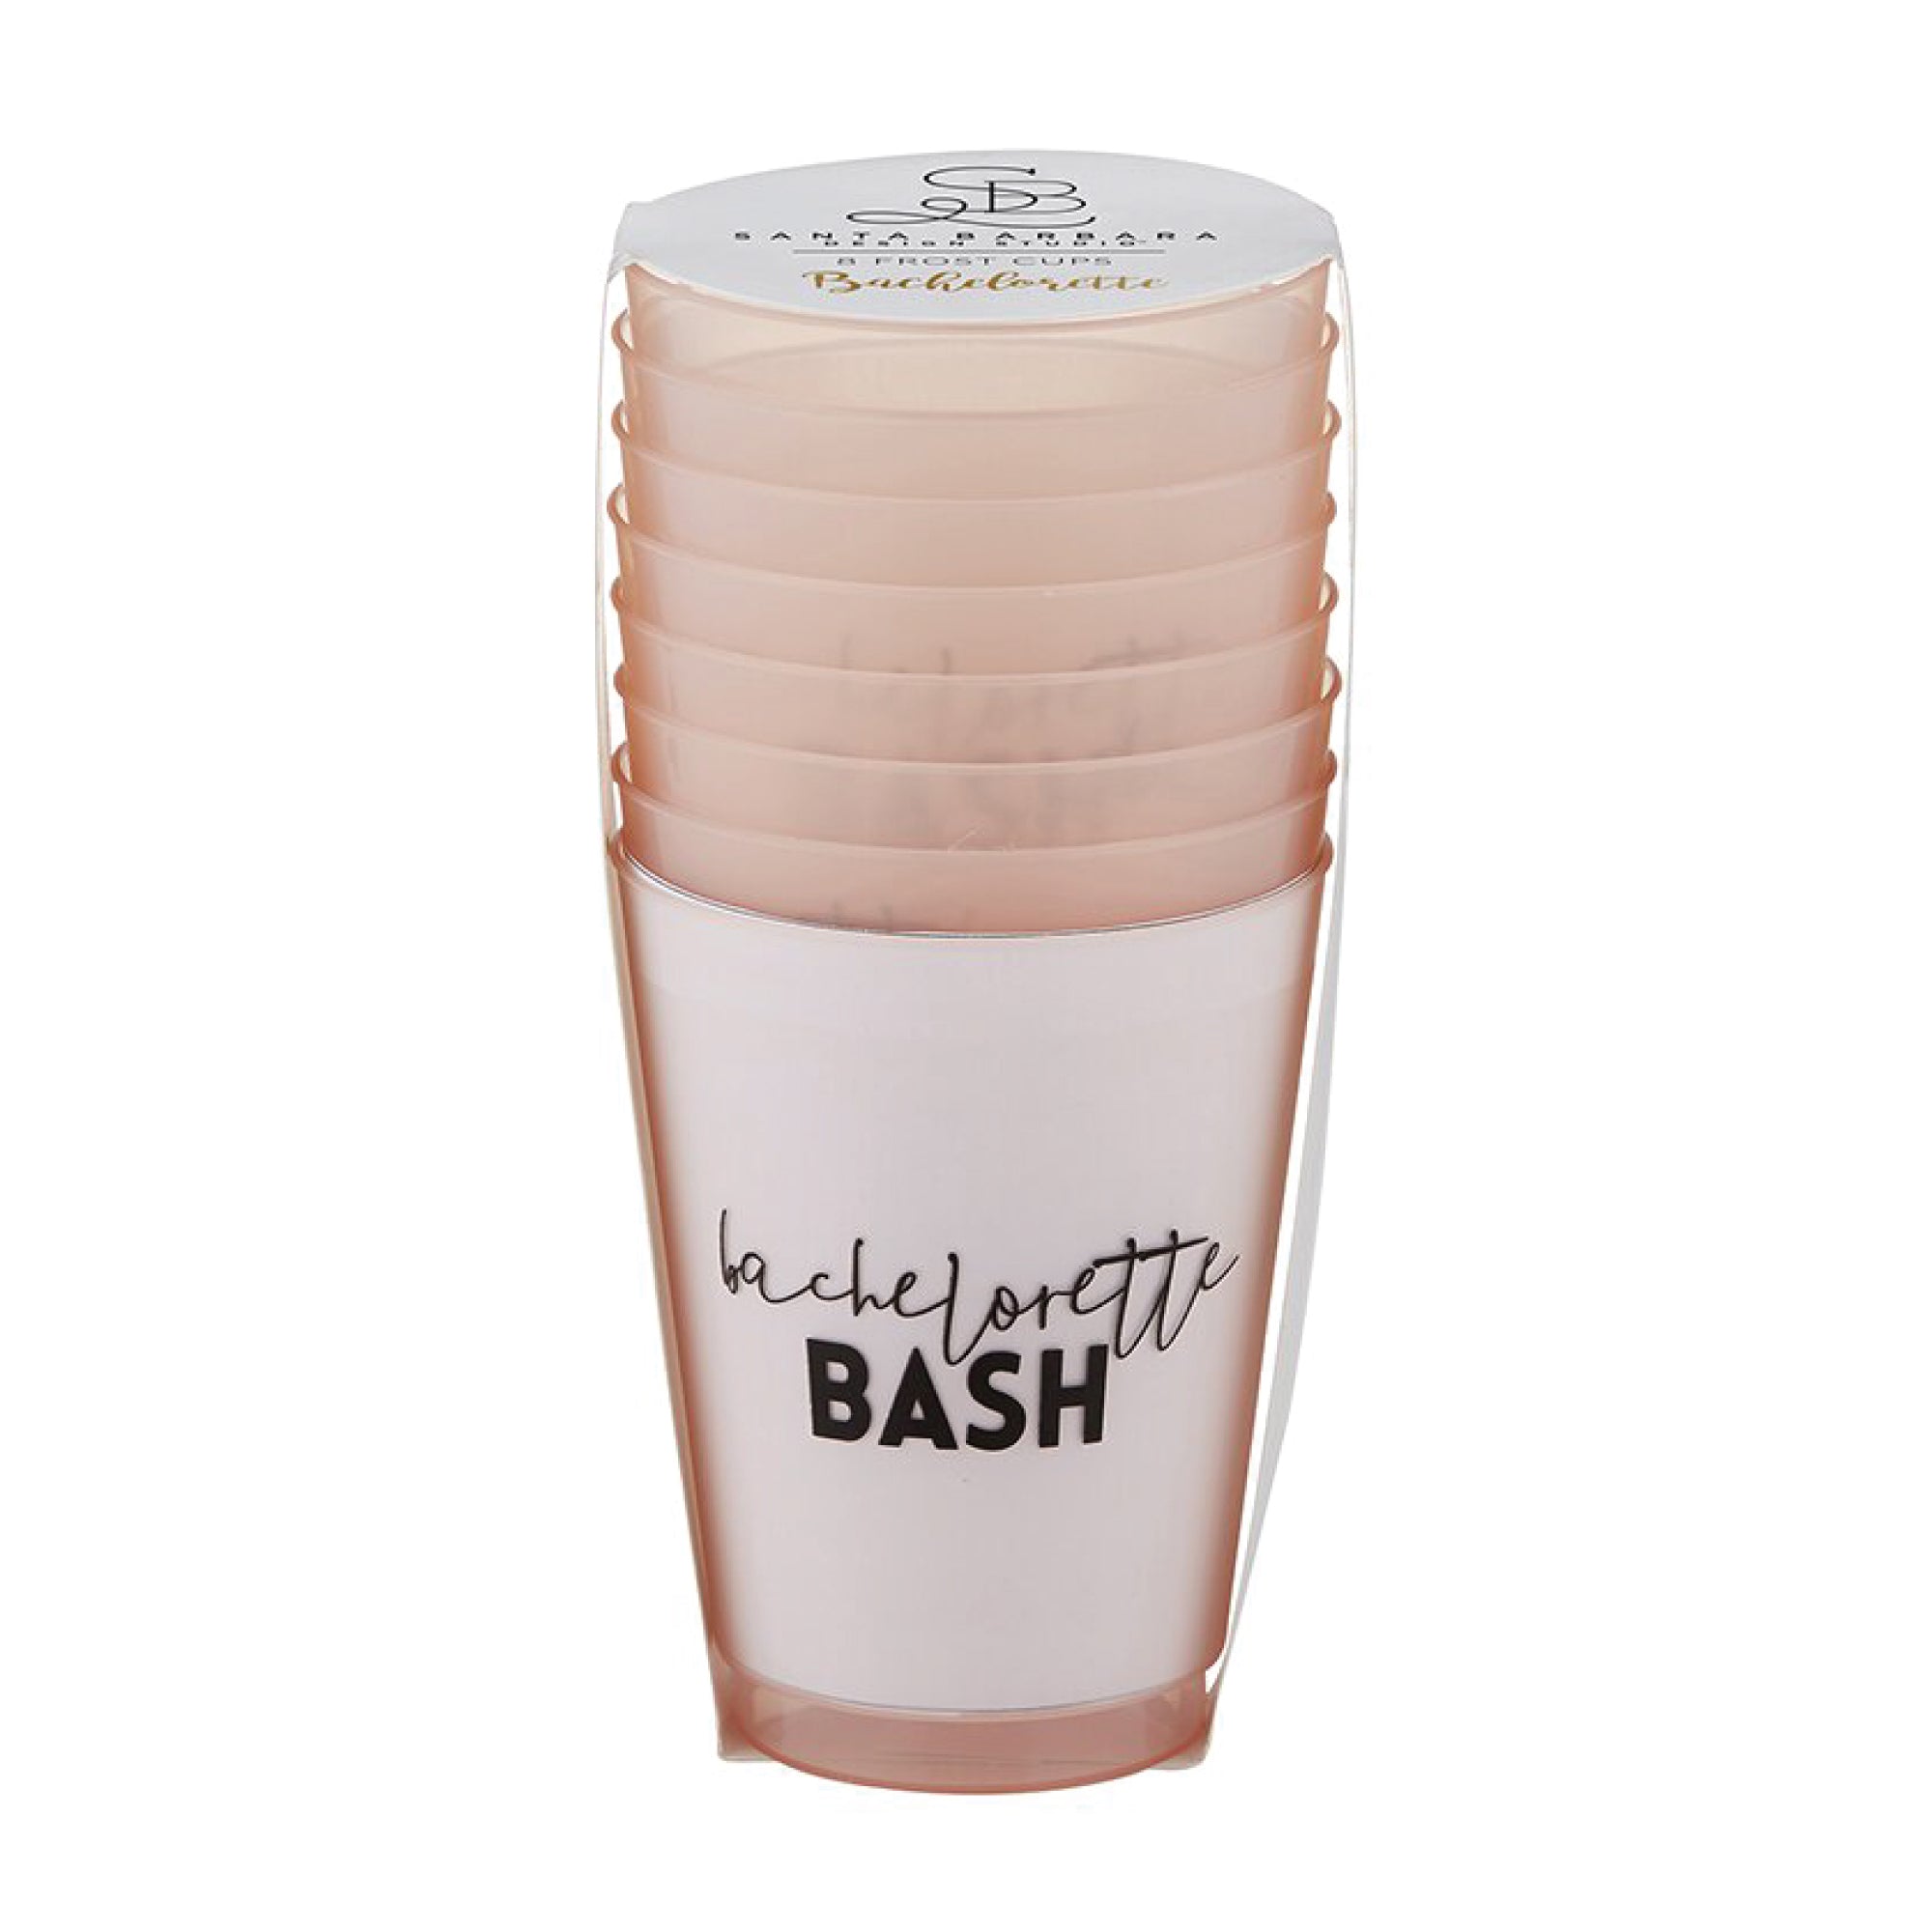 https://cdn.shopify.com/s/files/1/1449/4112/products/Bachelorette-Bash-Frosted-Cups-8-ct-Packaged_2000x.jpg?v=1681840685